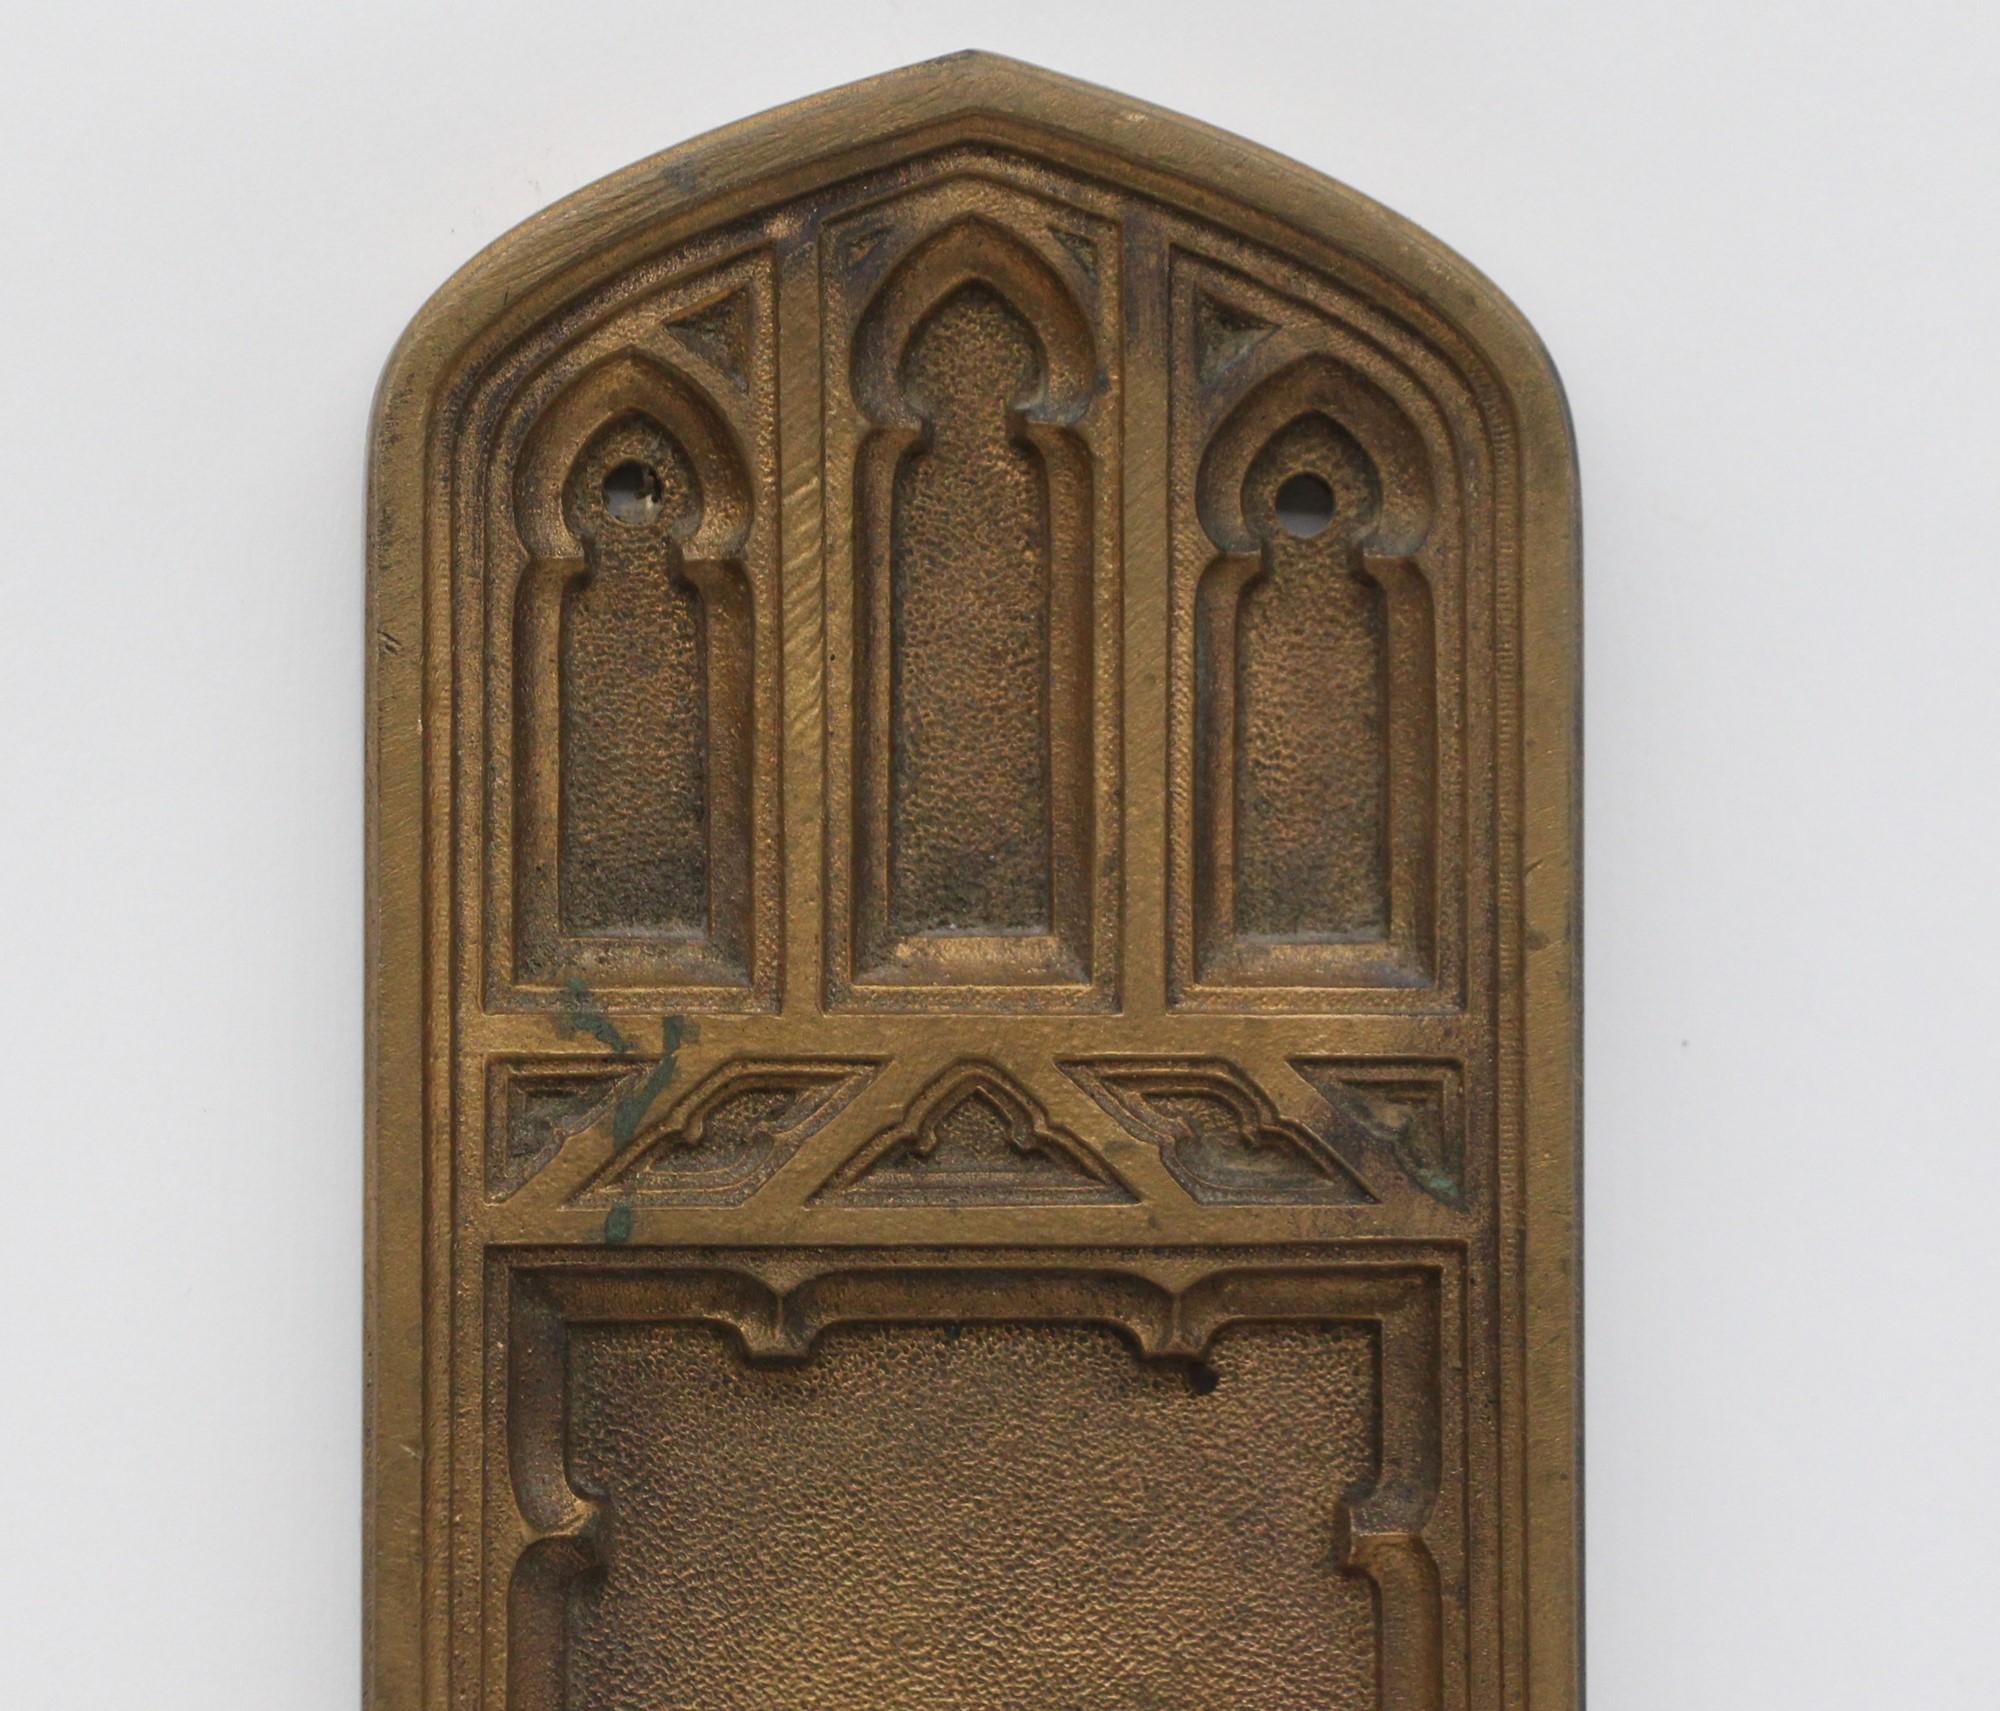 Antique heavy cast bronze door plate signed by Sargent. This decorative Gothic push plate has a cathedral design with an arched top and natural patina. Measure: 18 in. Please note, this item is located in our Scranton, PA location.



 